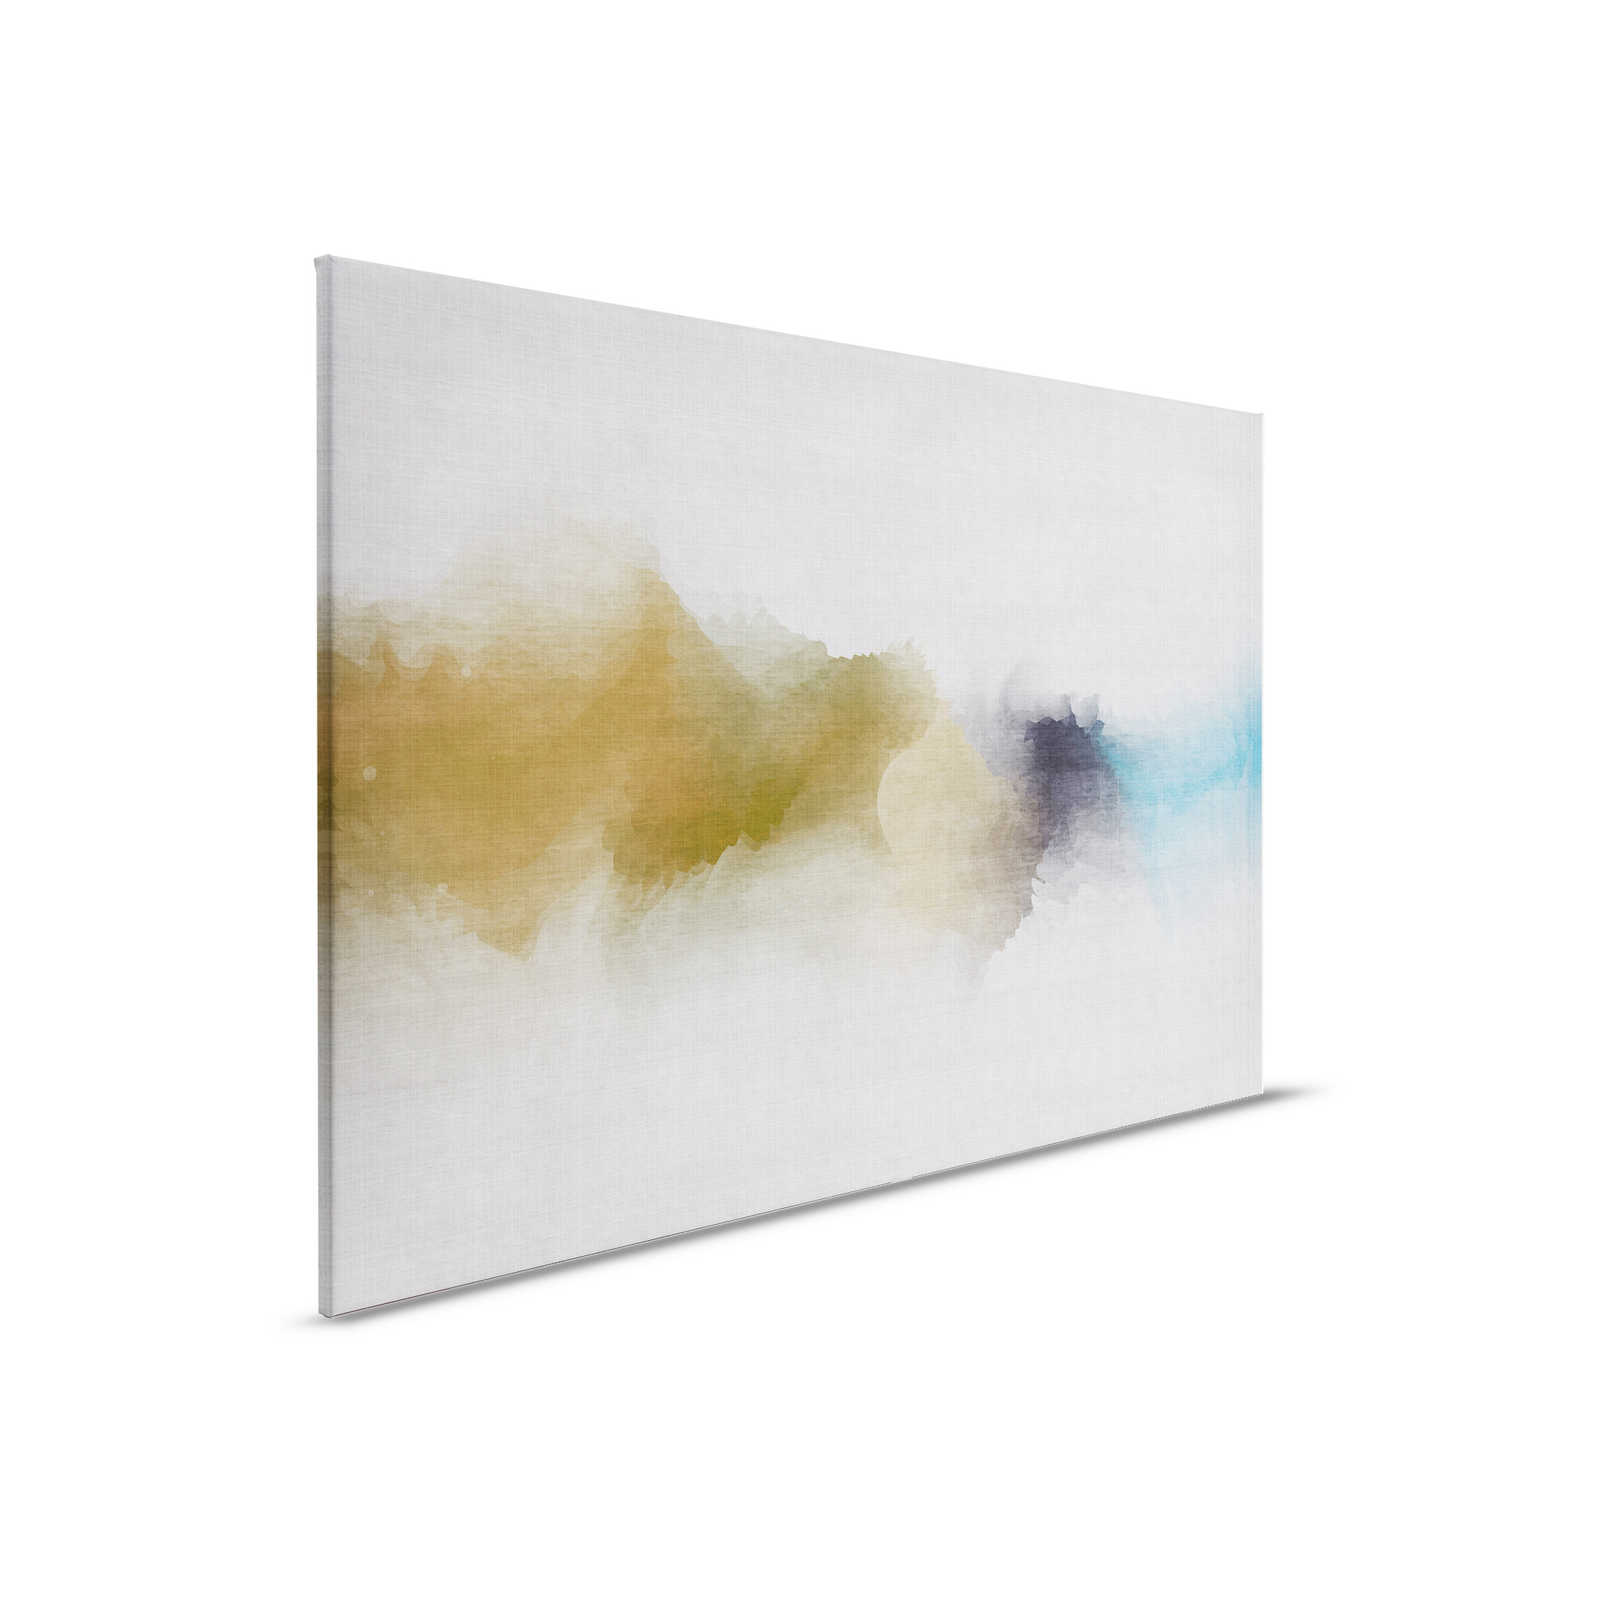         Daydream 3 - Canvas painting cloudy watercolour pattern- natural linen structure - 0.90 m x 0.60 m
    